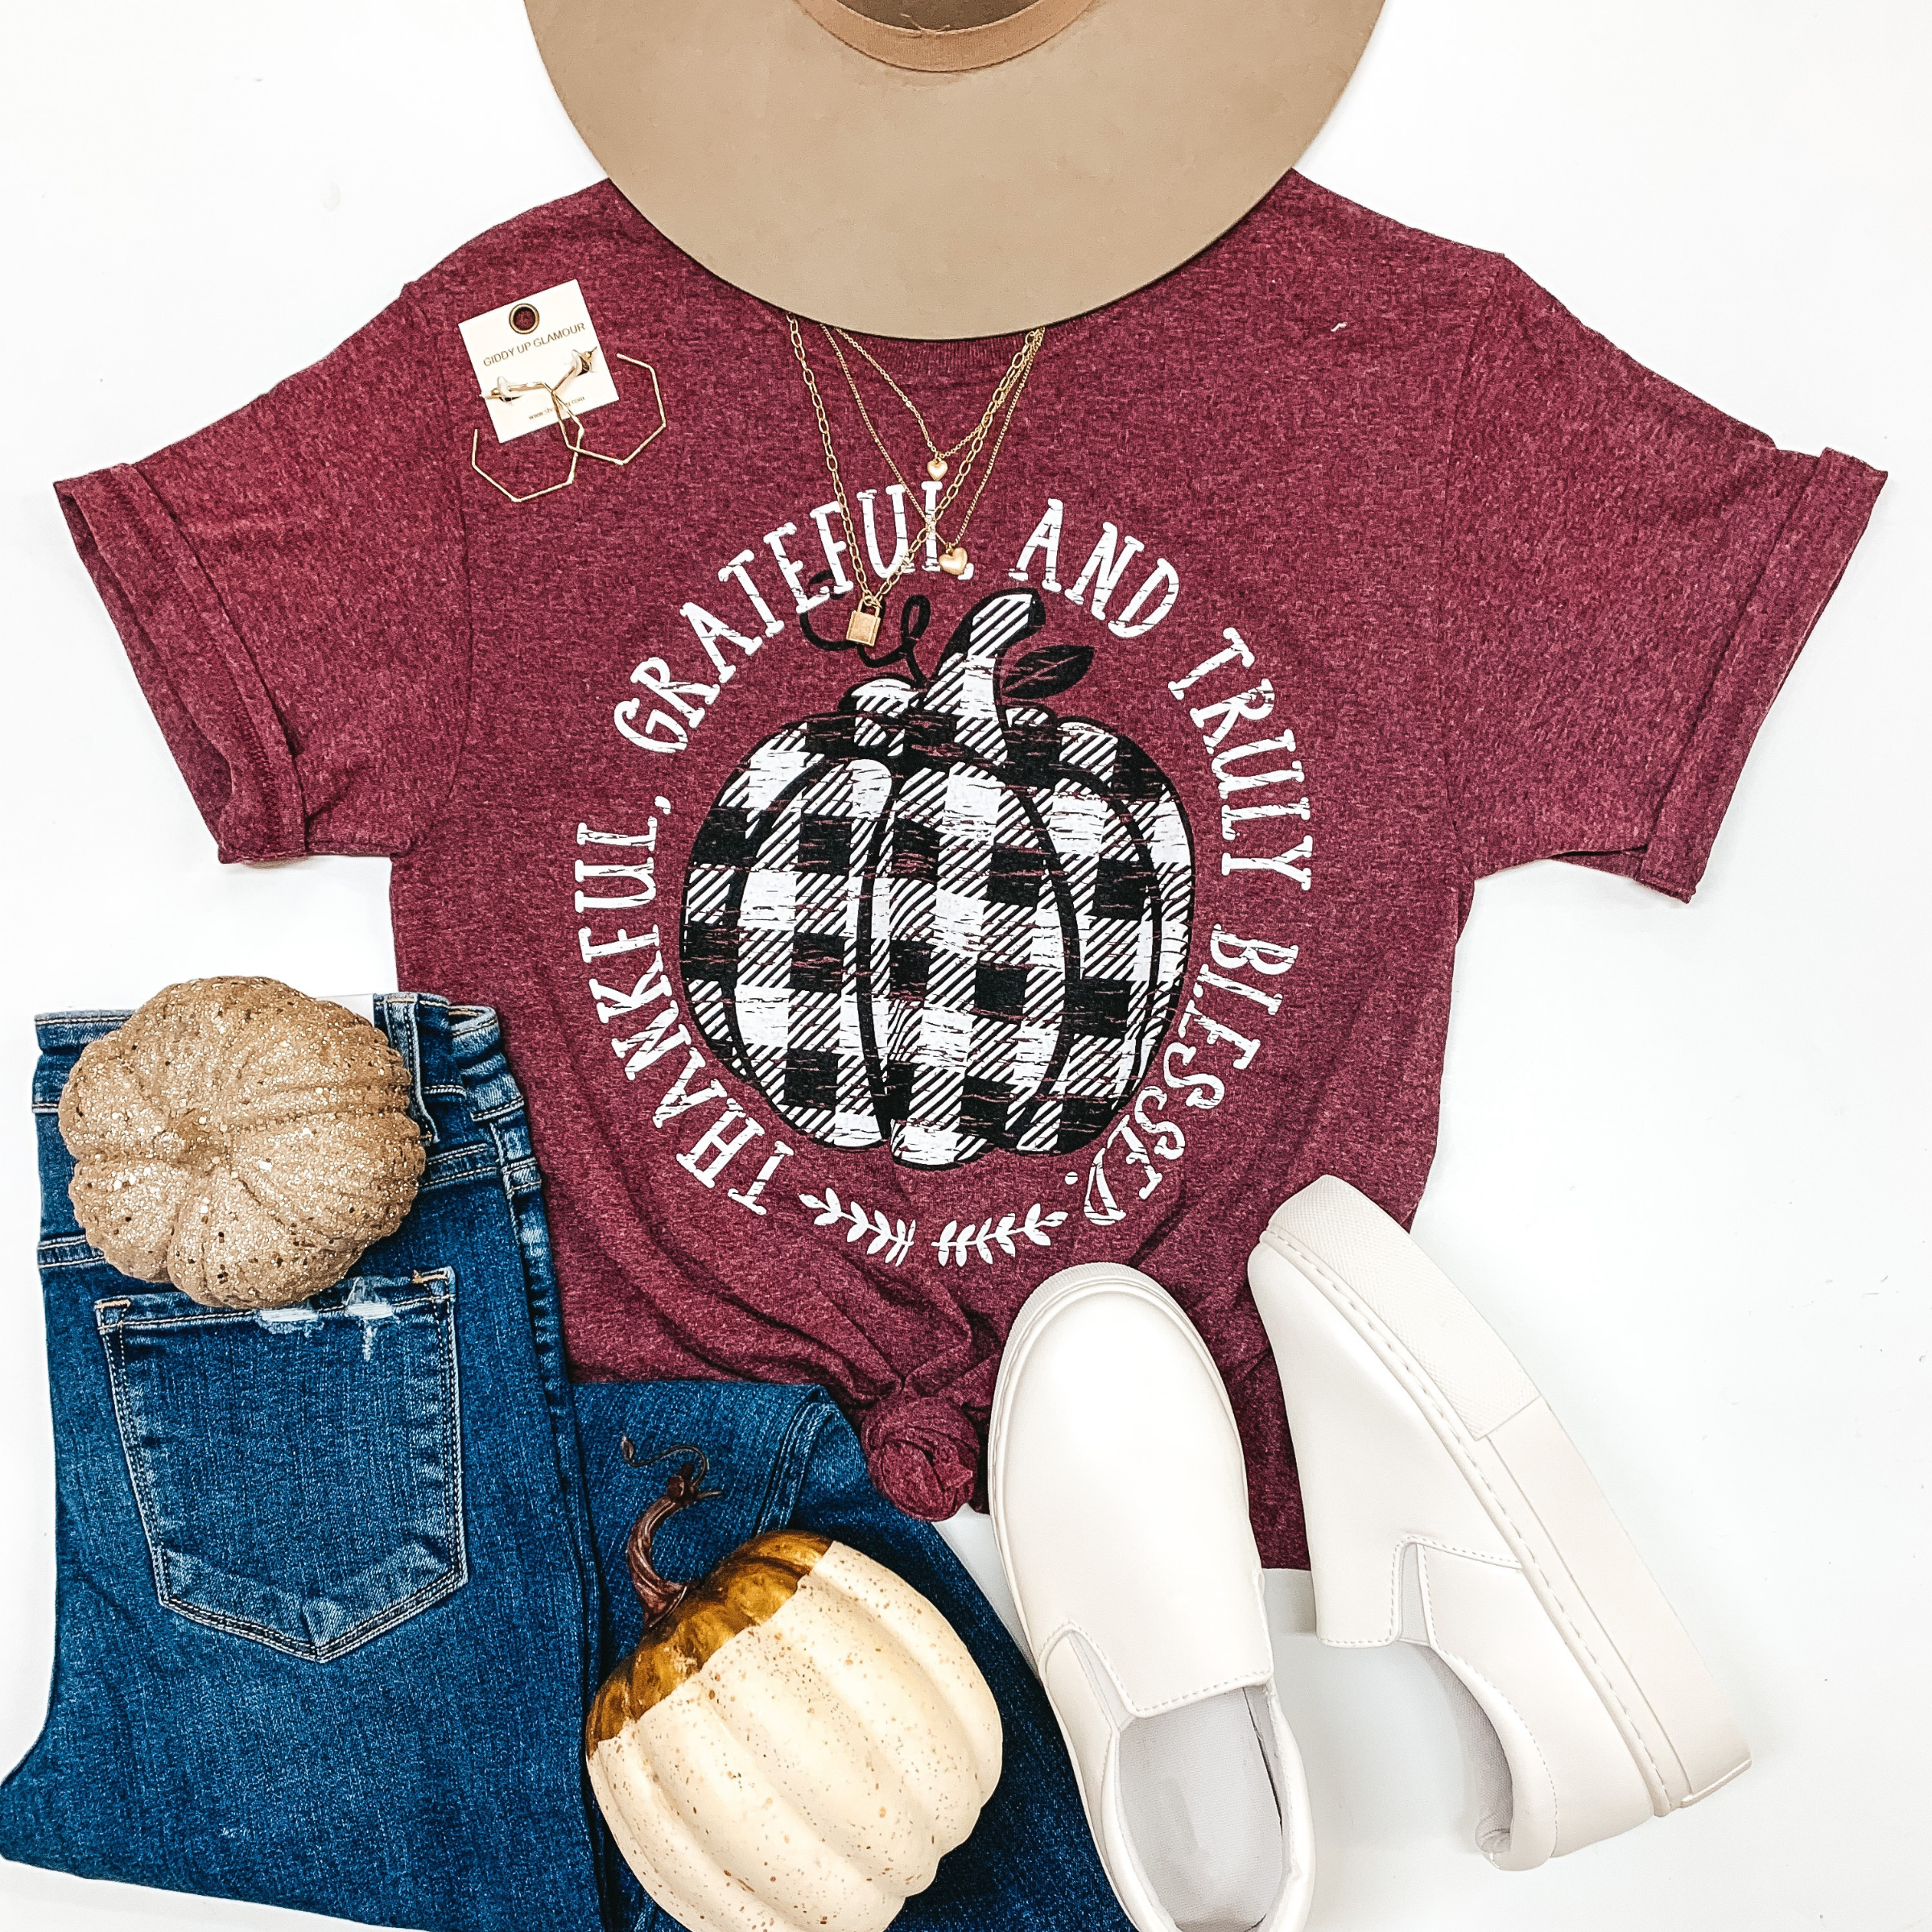 Thankful, Grateful, and Truly Blessed Short Sleeve Graphic Tee in Heather Maroon - Giddy Up Glamour Boutique